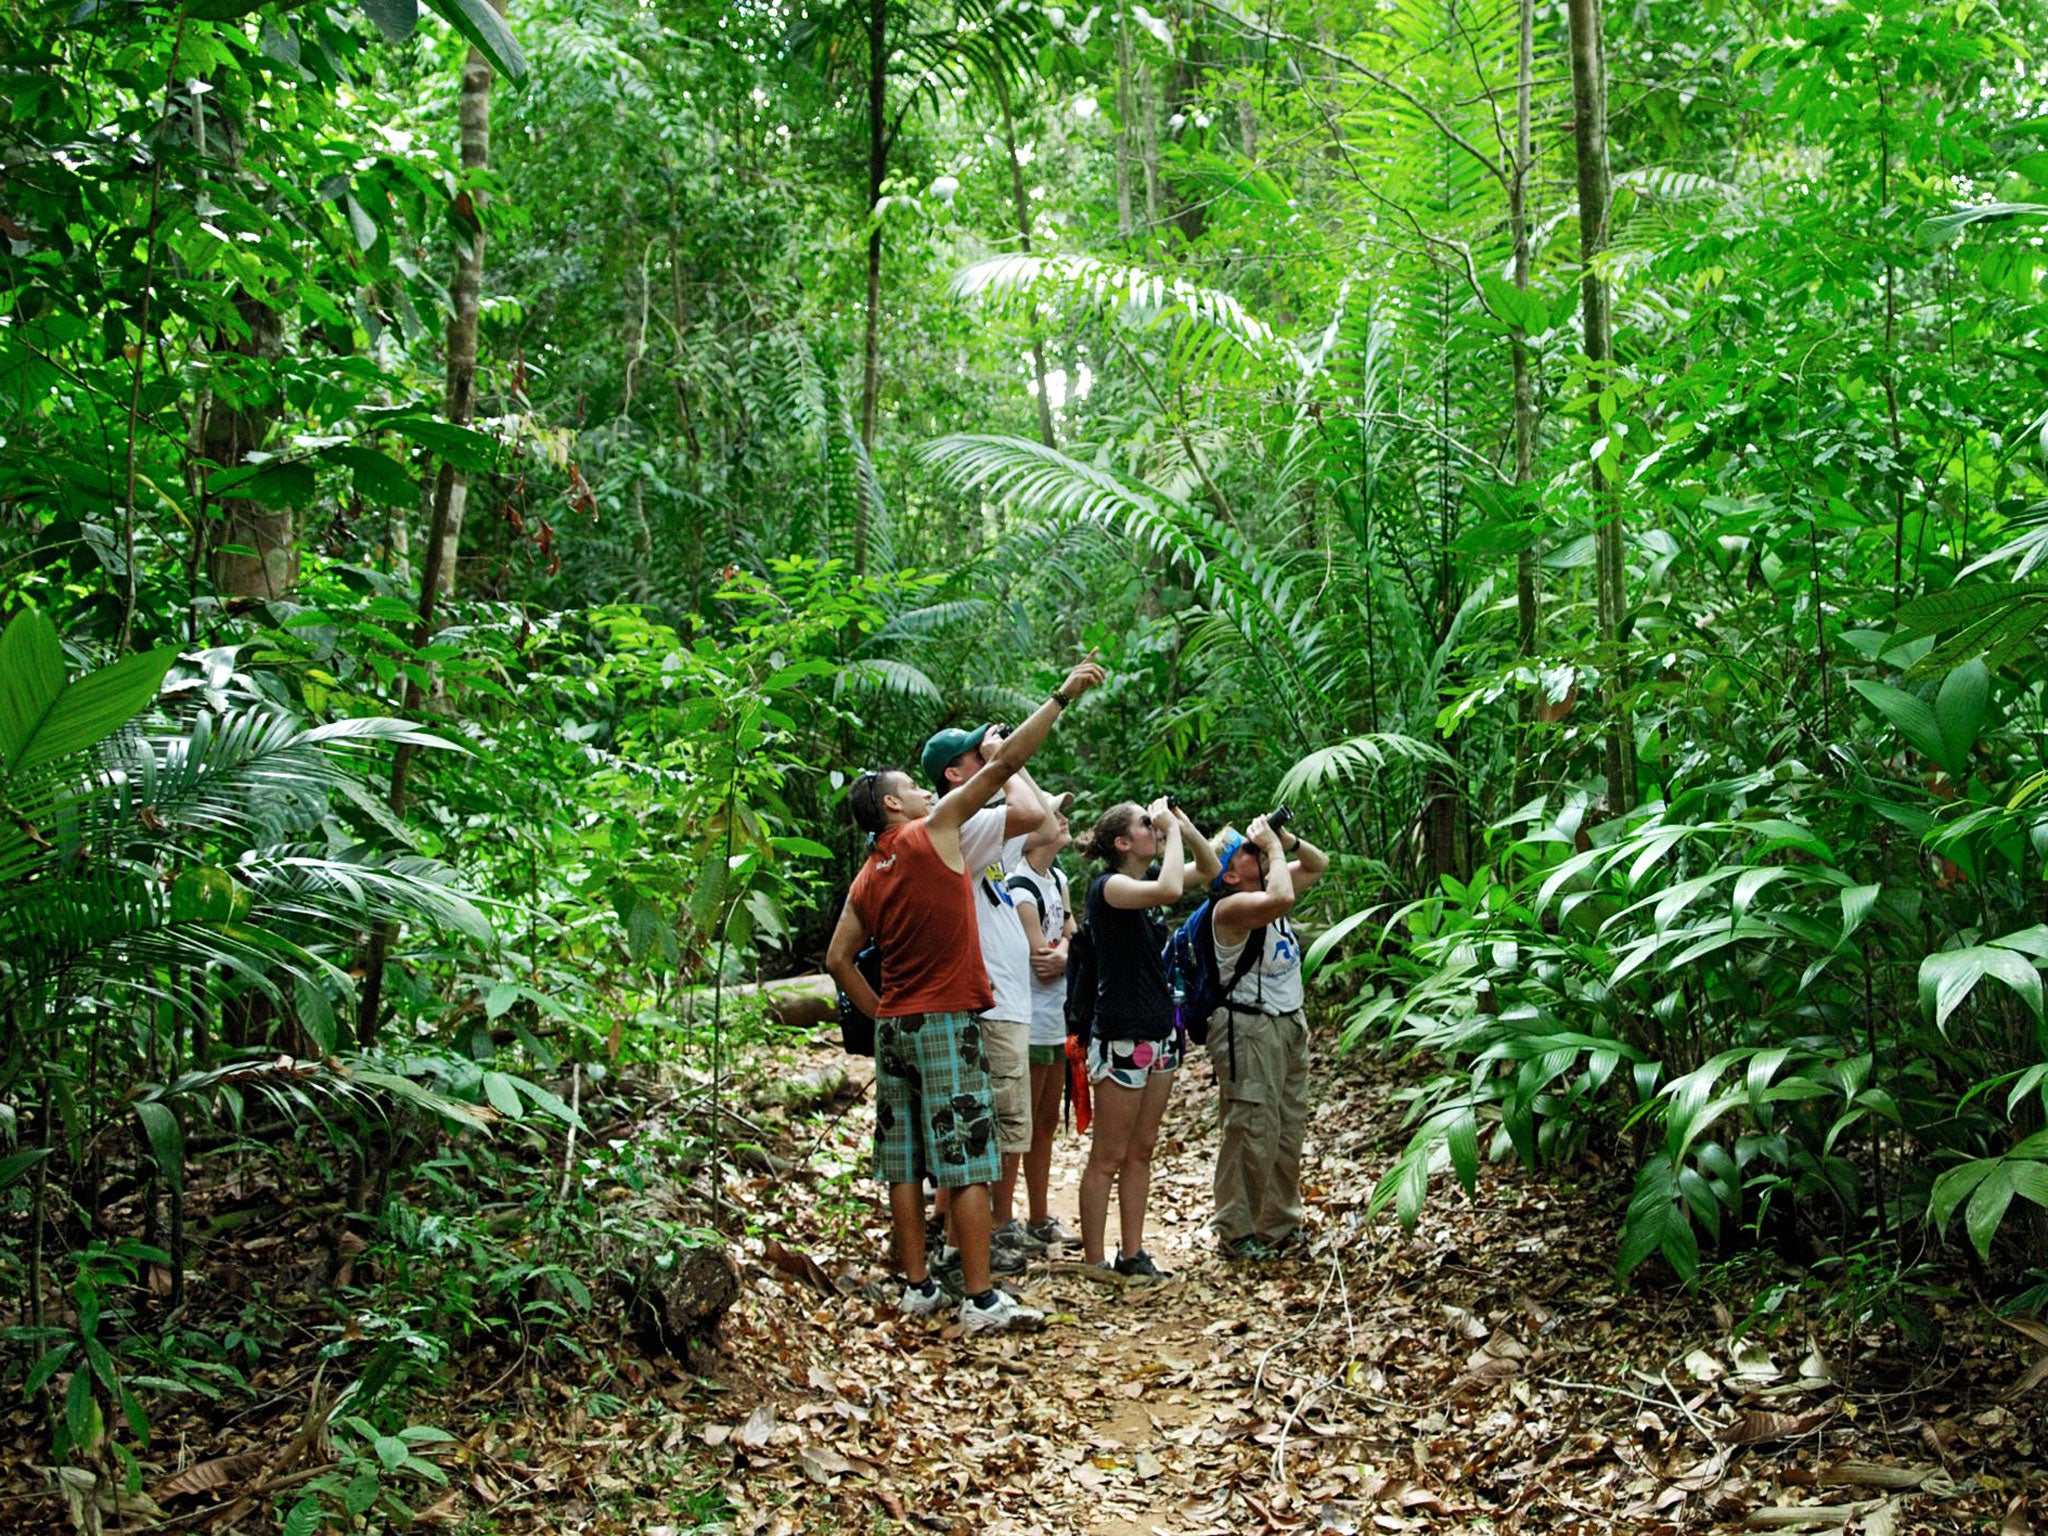 Where the wild things are: exploring Costa Rica